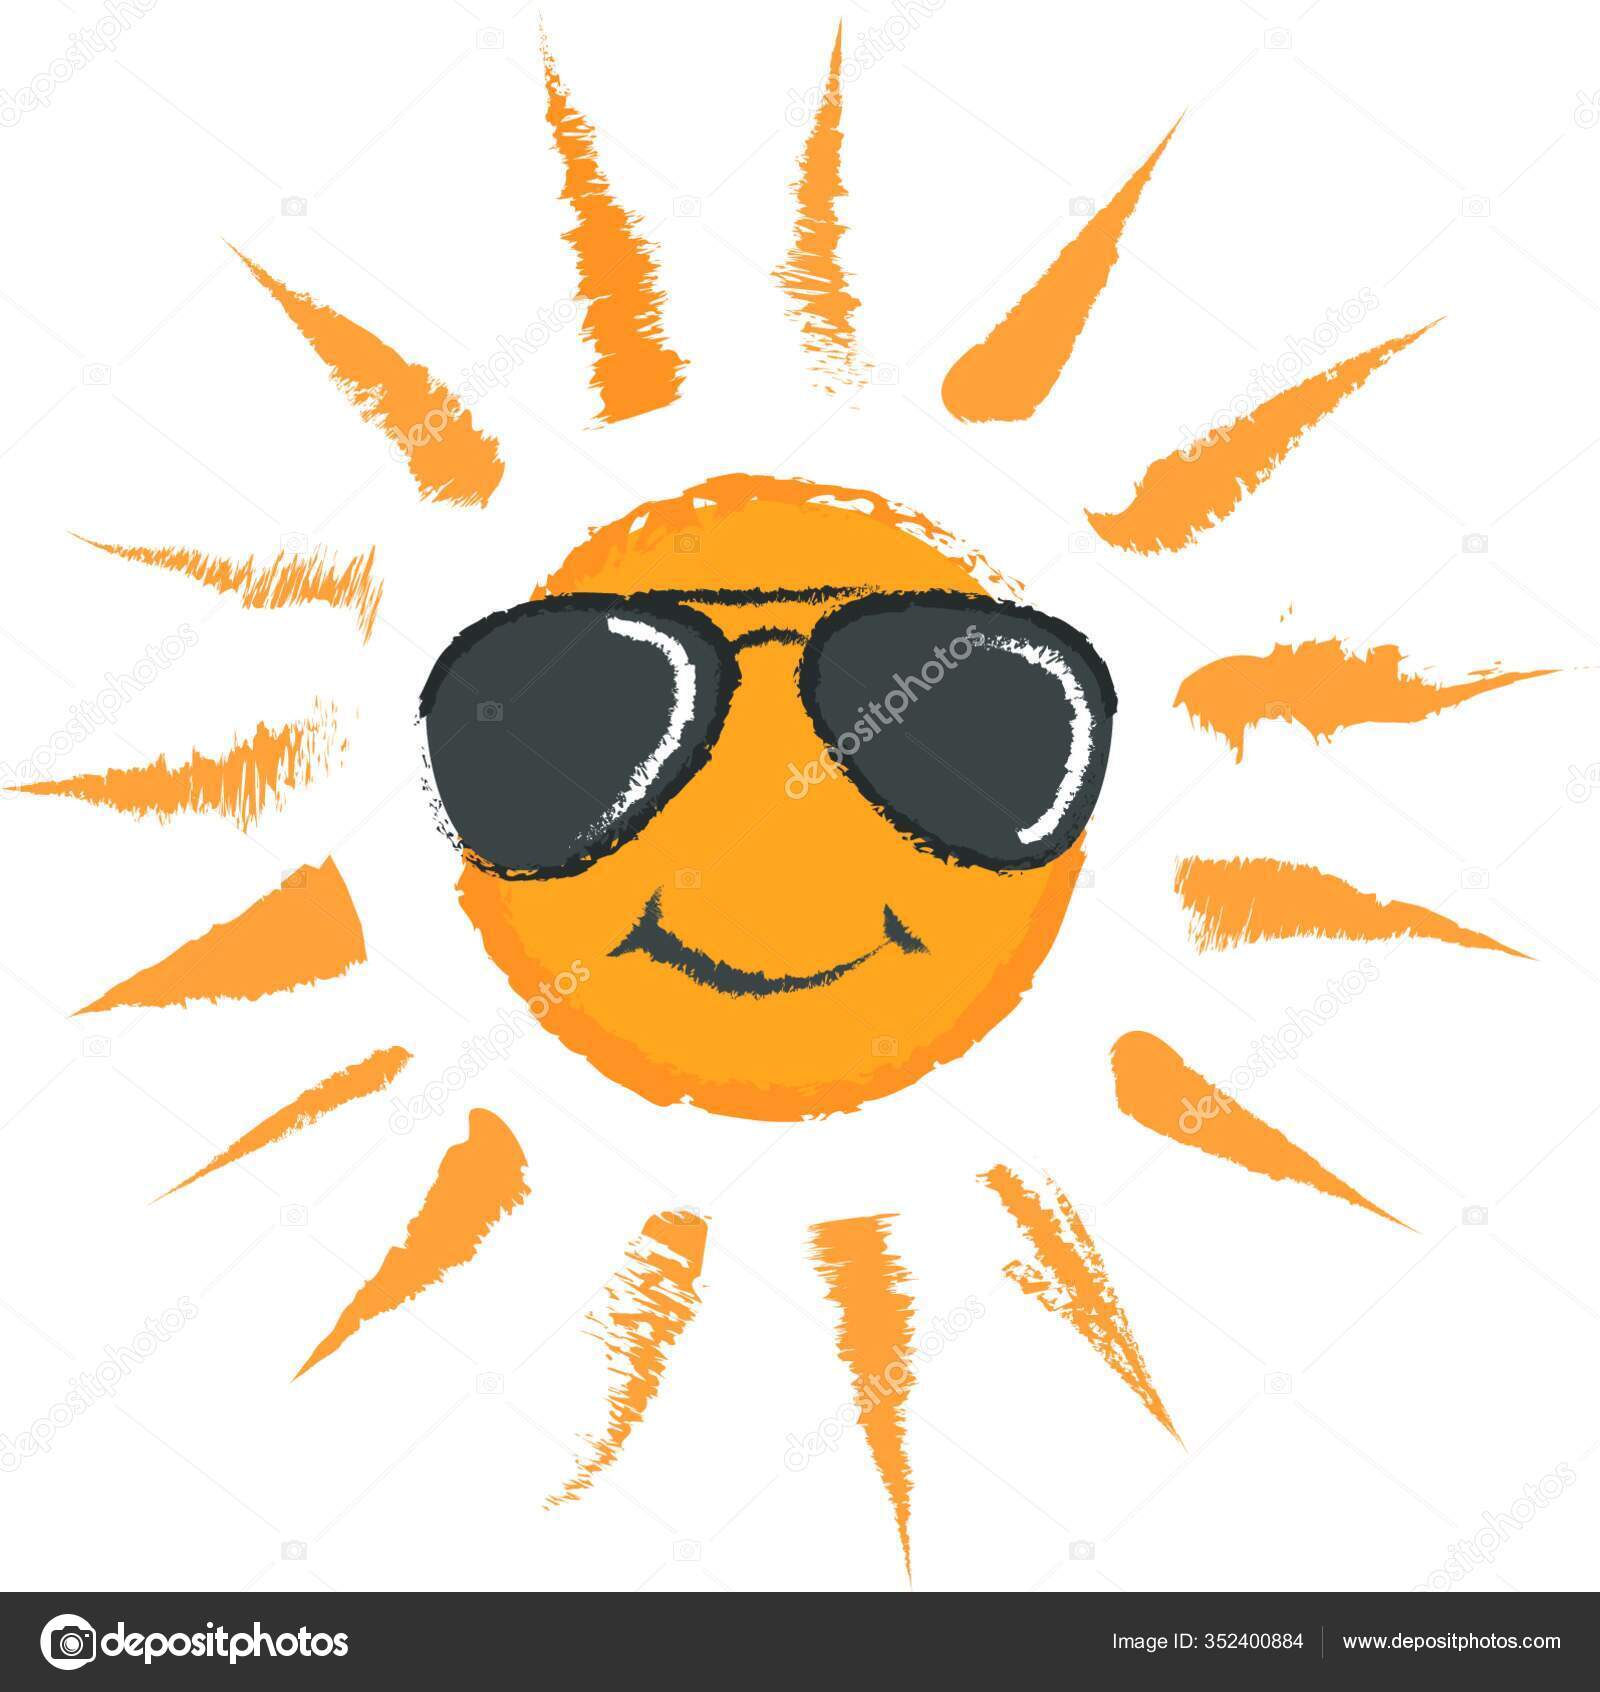 42,581 Cartoon Sun Sunglasses Royalty-Free Photos and Stock Images |  Shutterstock